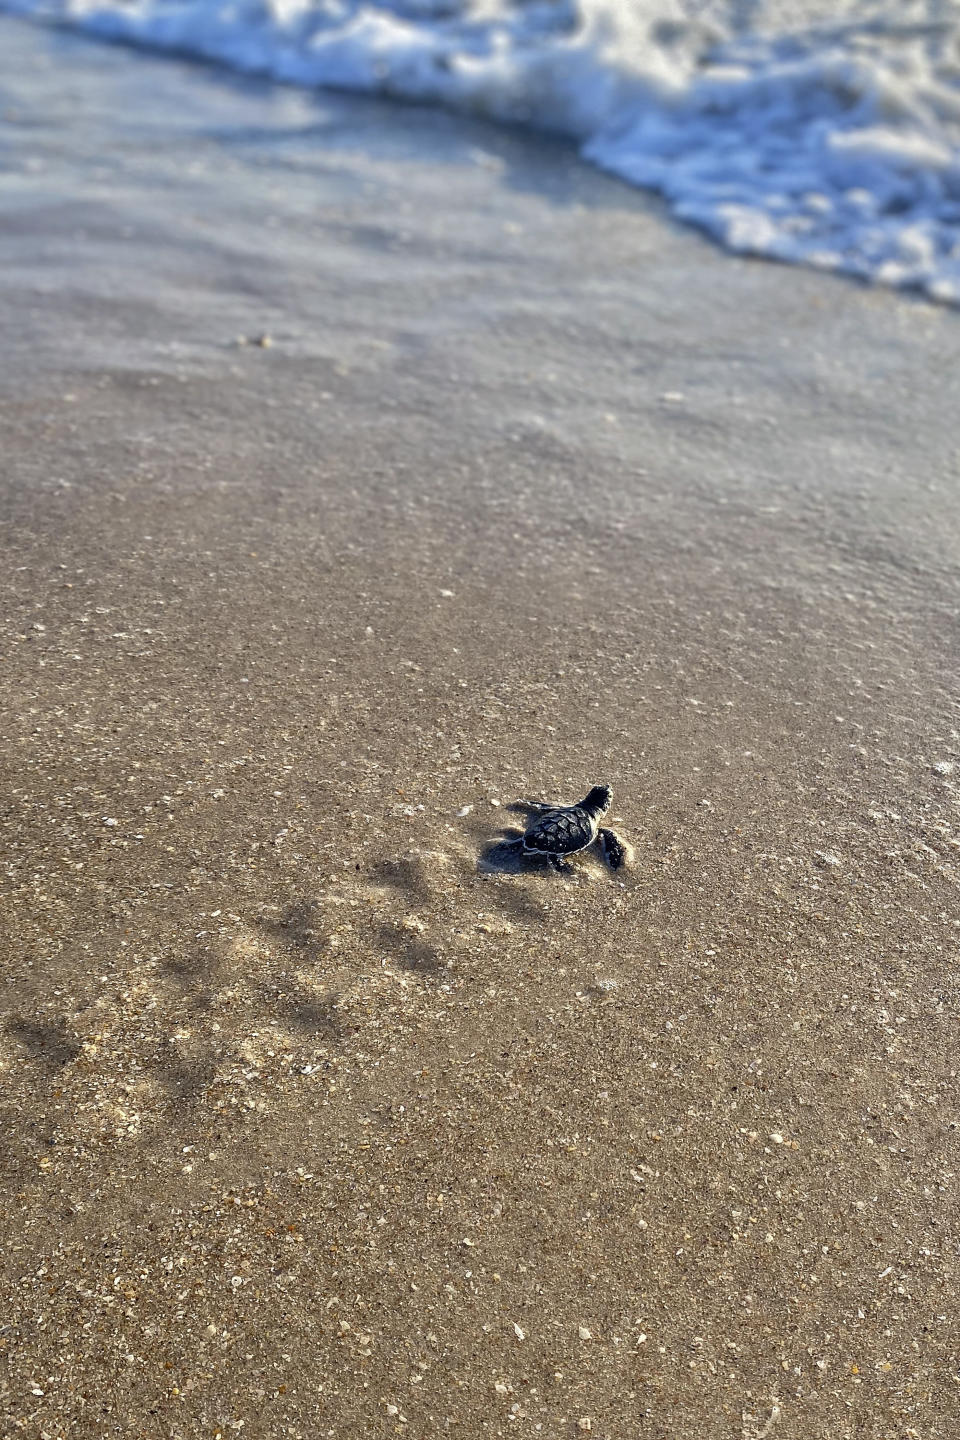 A Green Sea Turtle hatchling heads for the Atlantic Ocean in this Aug. 8, 2020, in Cape Canaveral, Fla. By most measures, it was a banner year for sea turtle nests at beaches around the U.S., including record numbers for some species in Florida and elsewhere. Yet the positive picture for turtles is tempered by climate change threats, including higher sand temperatures that produce fewer males, changes in ocean currents that disrupt their journeys and increasingly severe storms that wash away nests. (Stella Maris/Florida Space Coast Office of Tourism via AP)